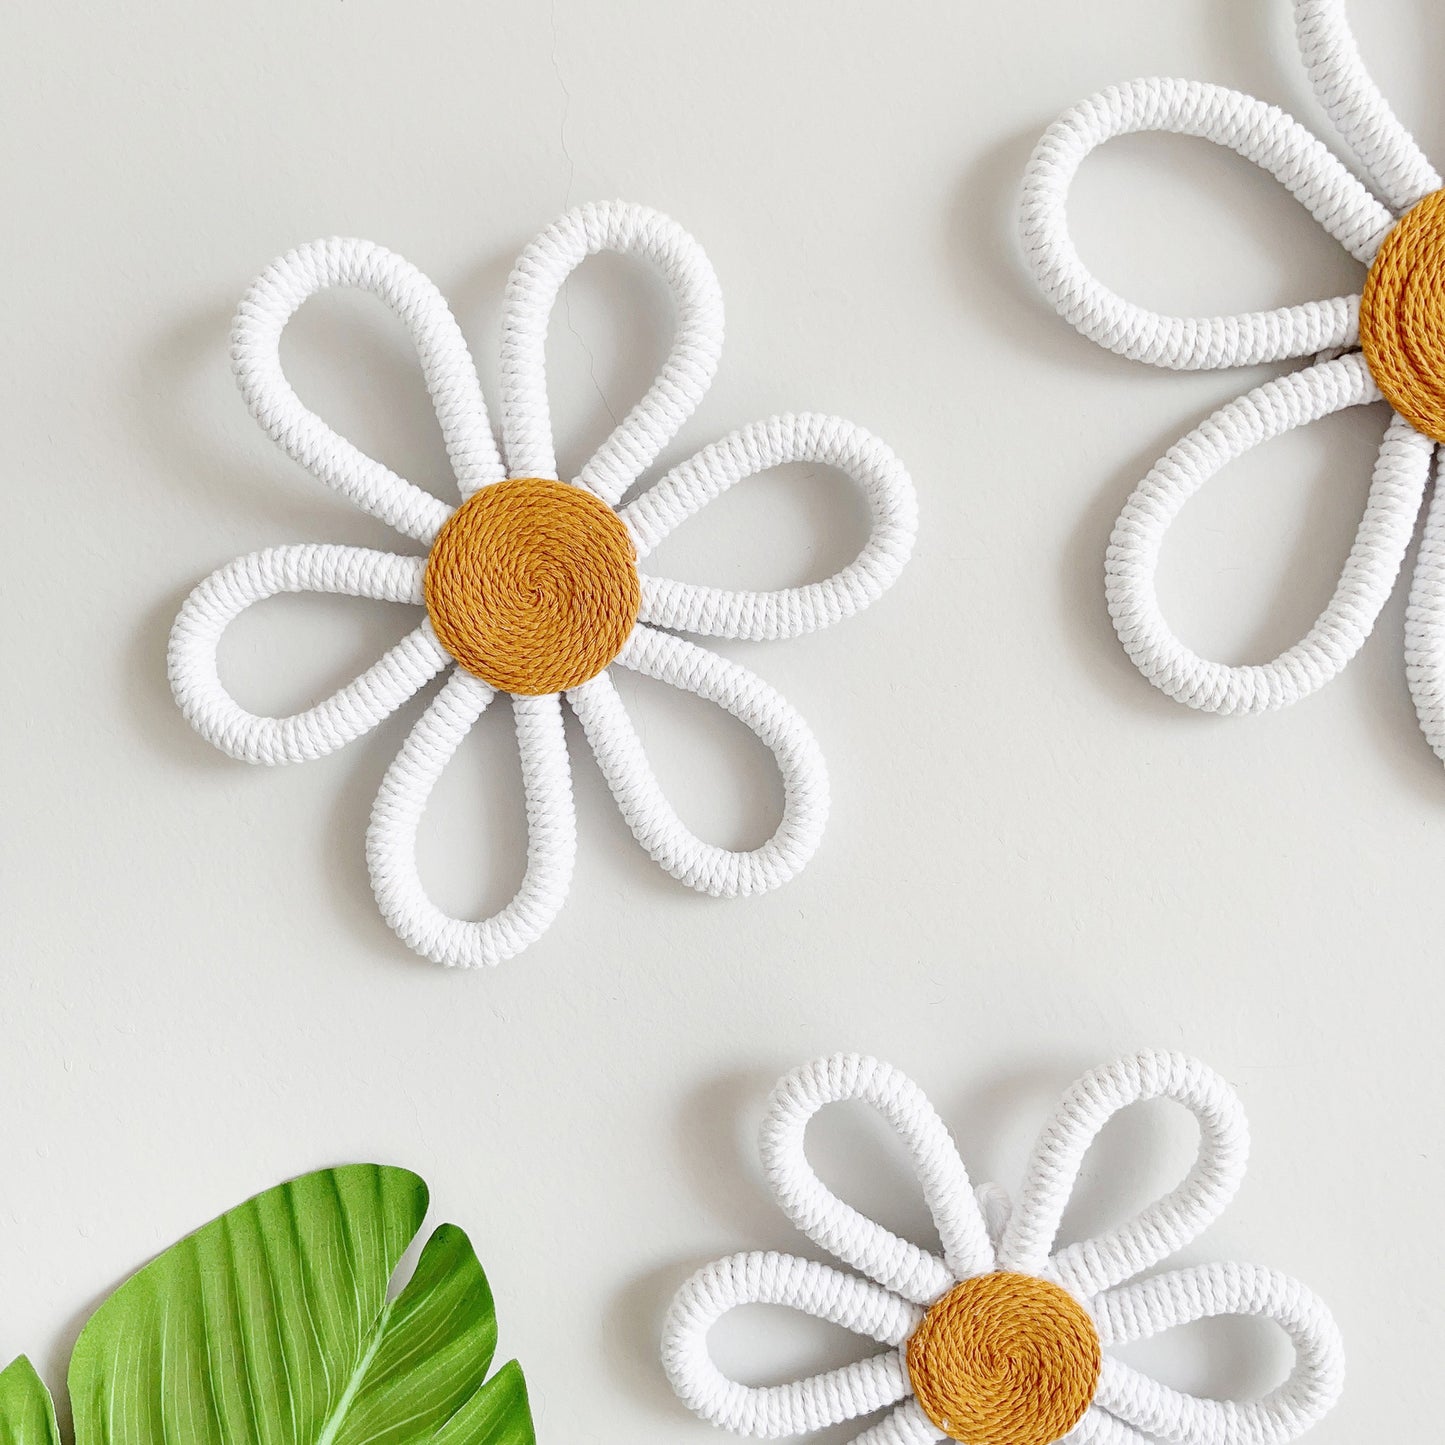 Daisy Flower Woven Wall Hanging: Adorable Nursery Decor for Girls, Infant and Children's Room Wall Decor - Handcrafted Floral Wall Art